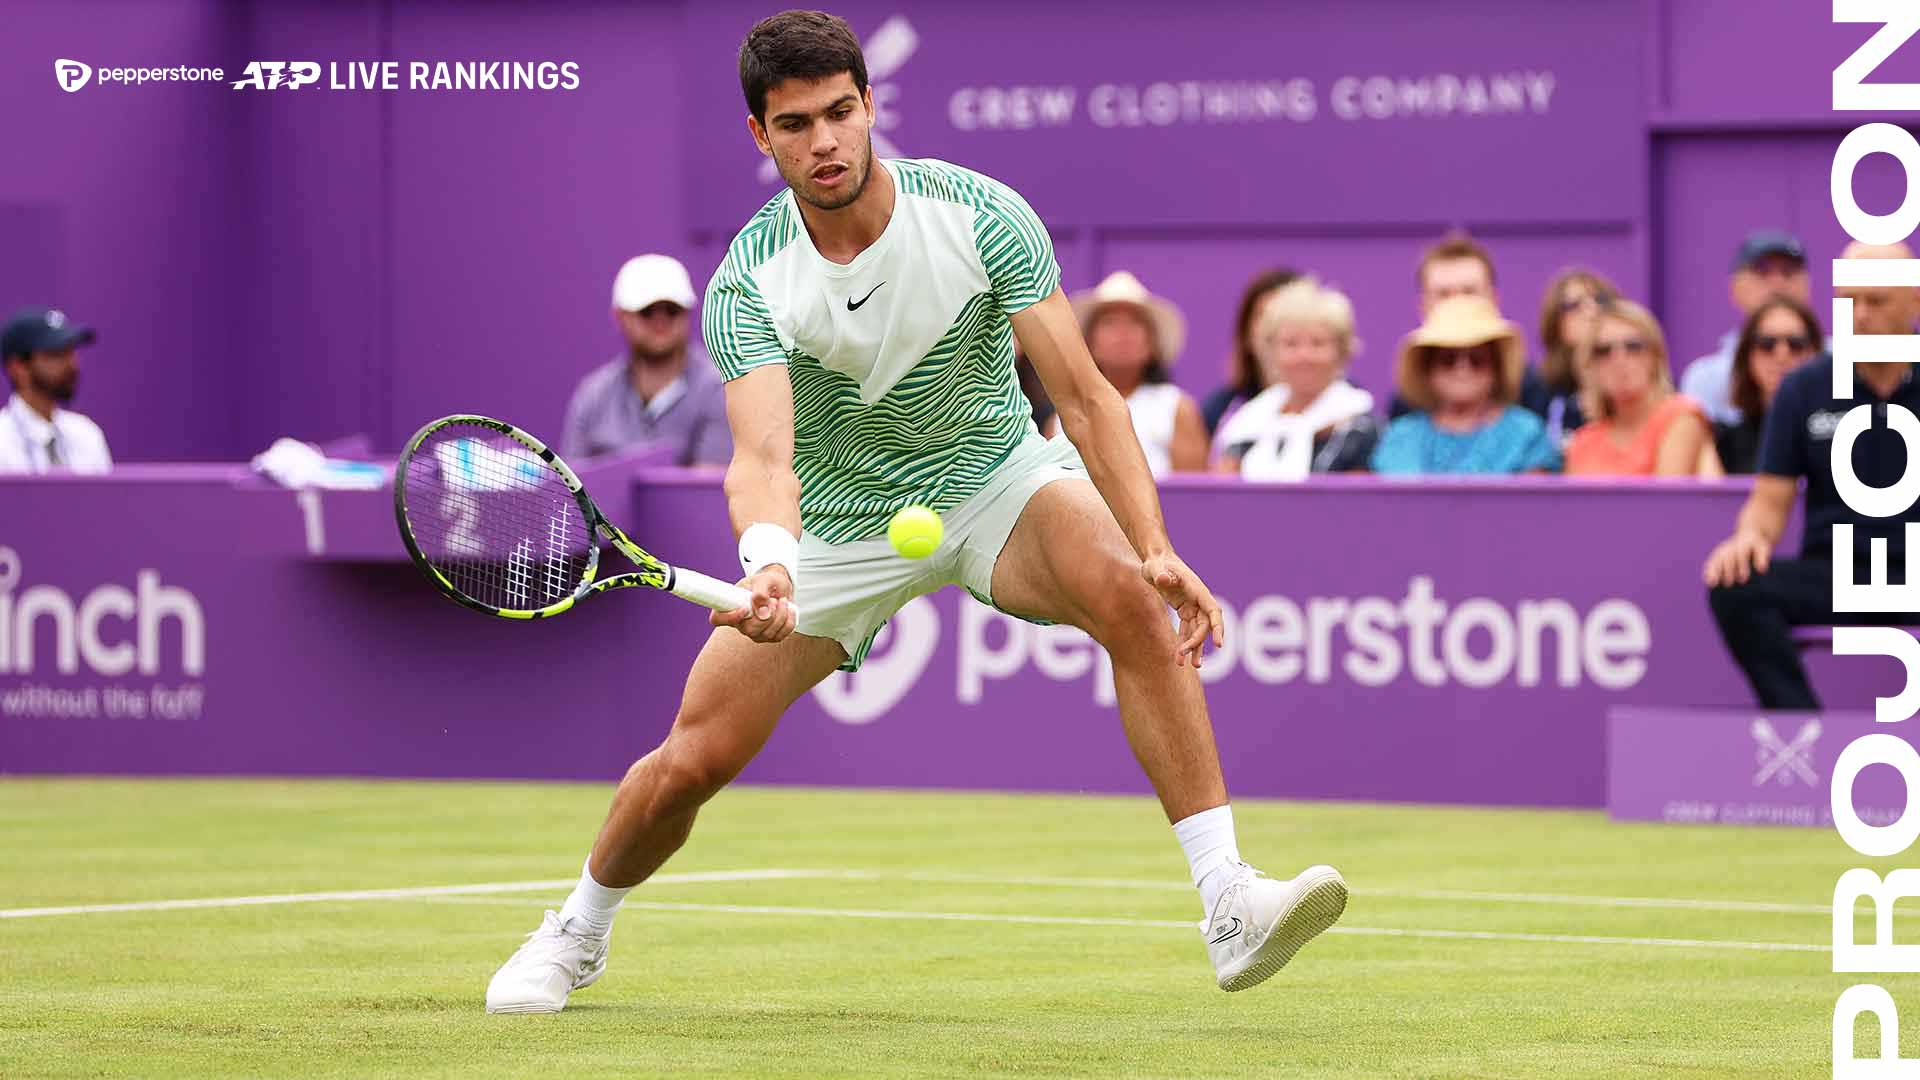 Carlos Alcaraz is trying to win his first grass-court title this week at Queen's Club.